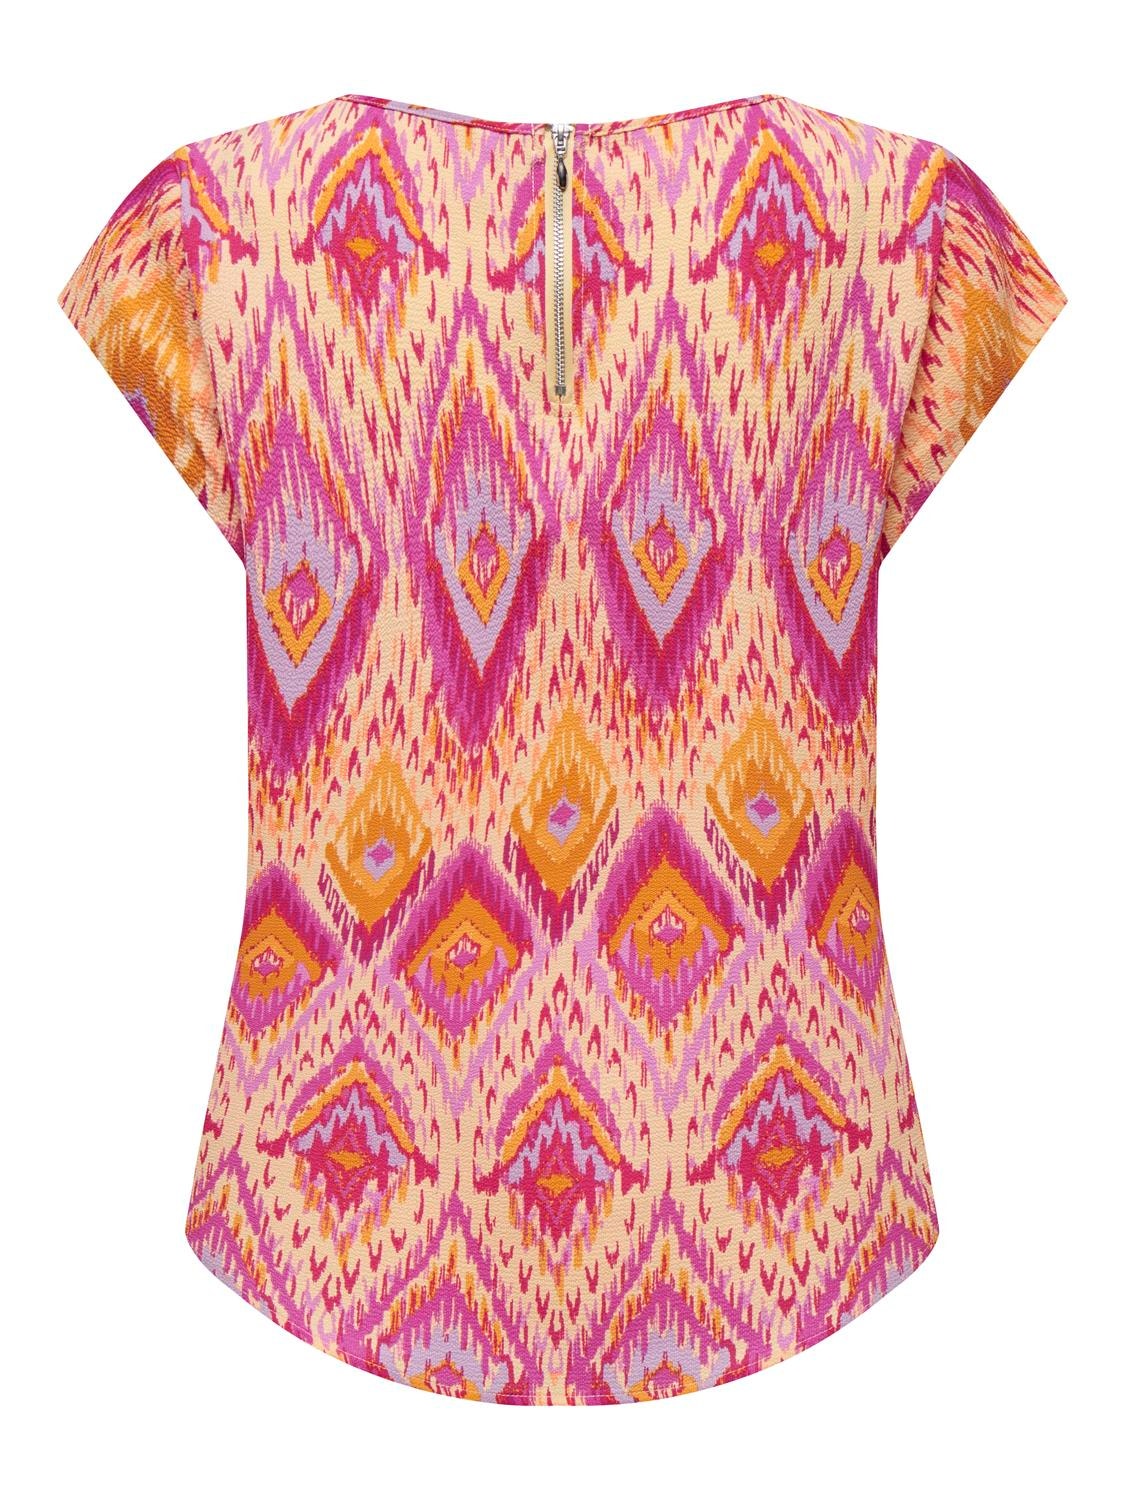 ONLY Printed Short Sleeved Top -Raspberry Rose - 15161116